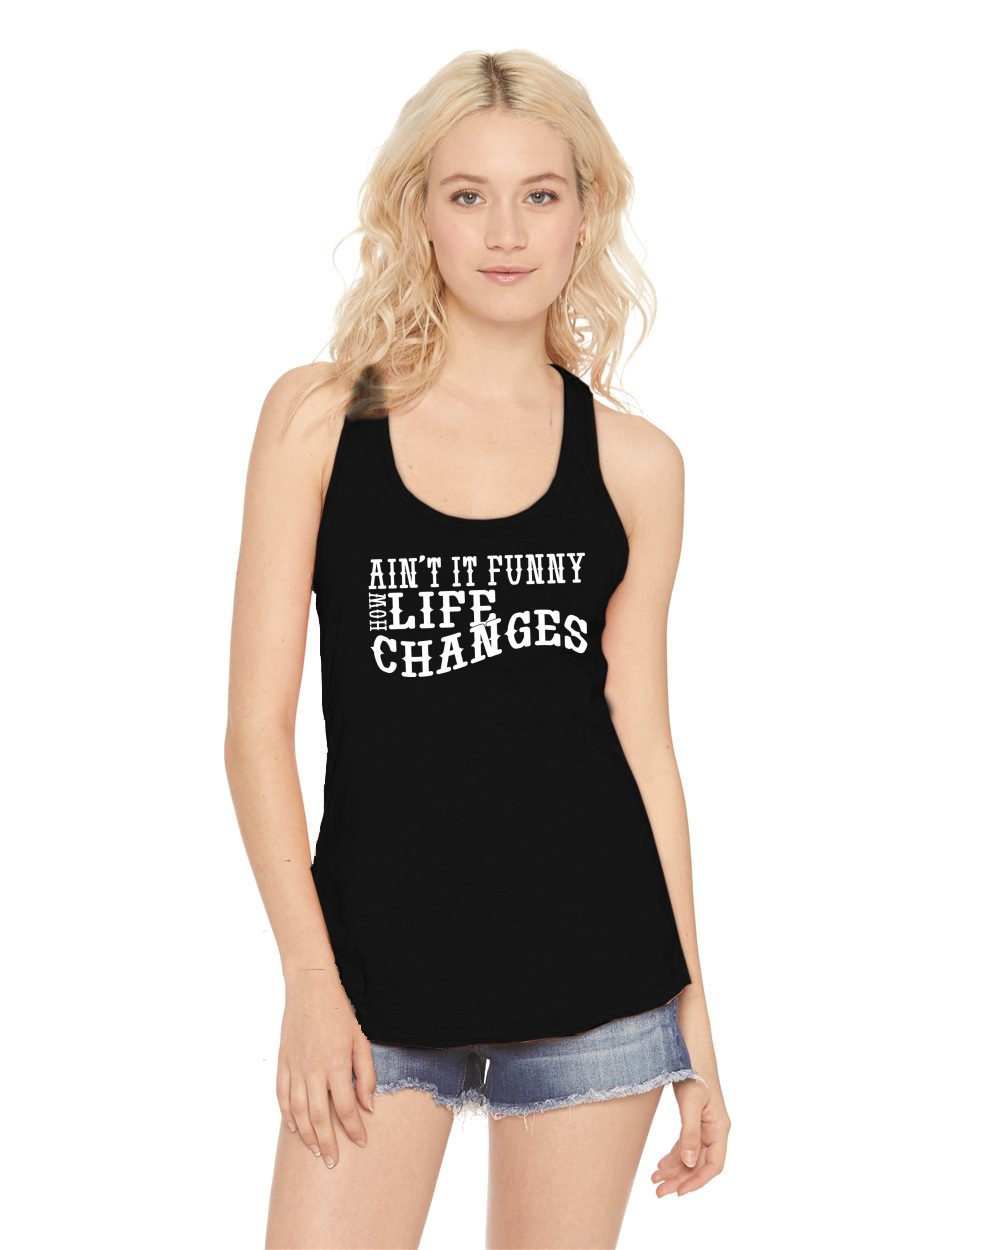 Ladies Aint It Funny Life Changes Racerback Country Music Concert | eBay